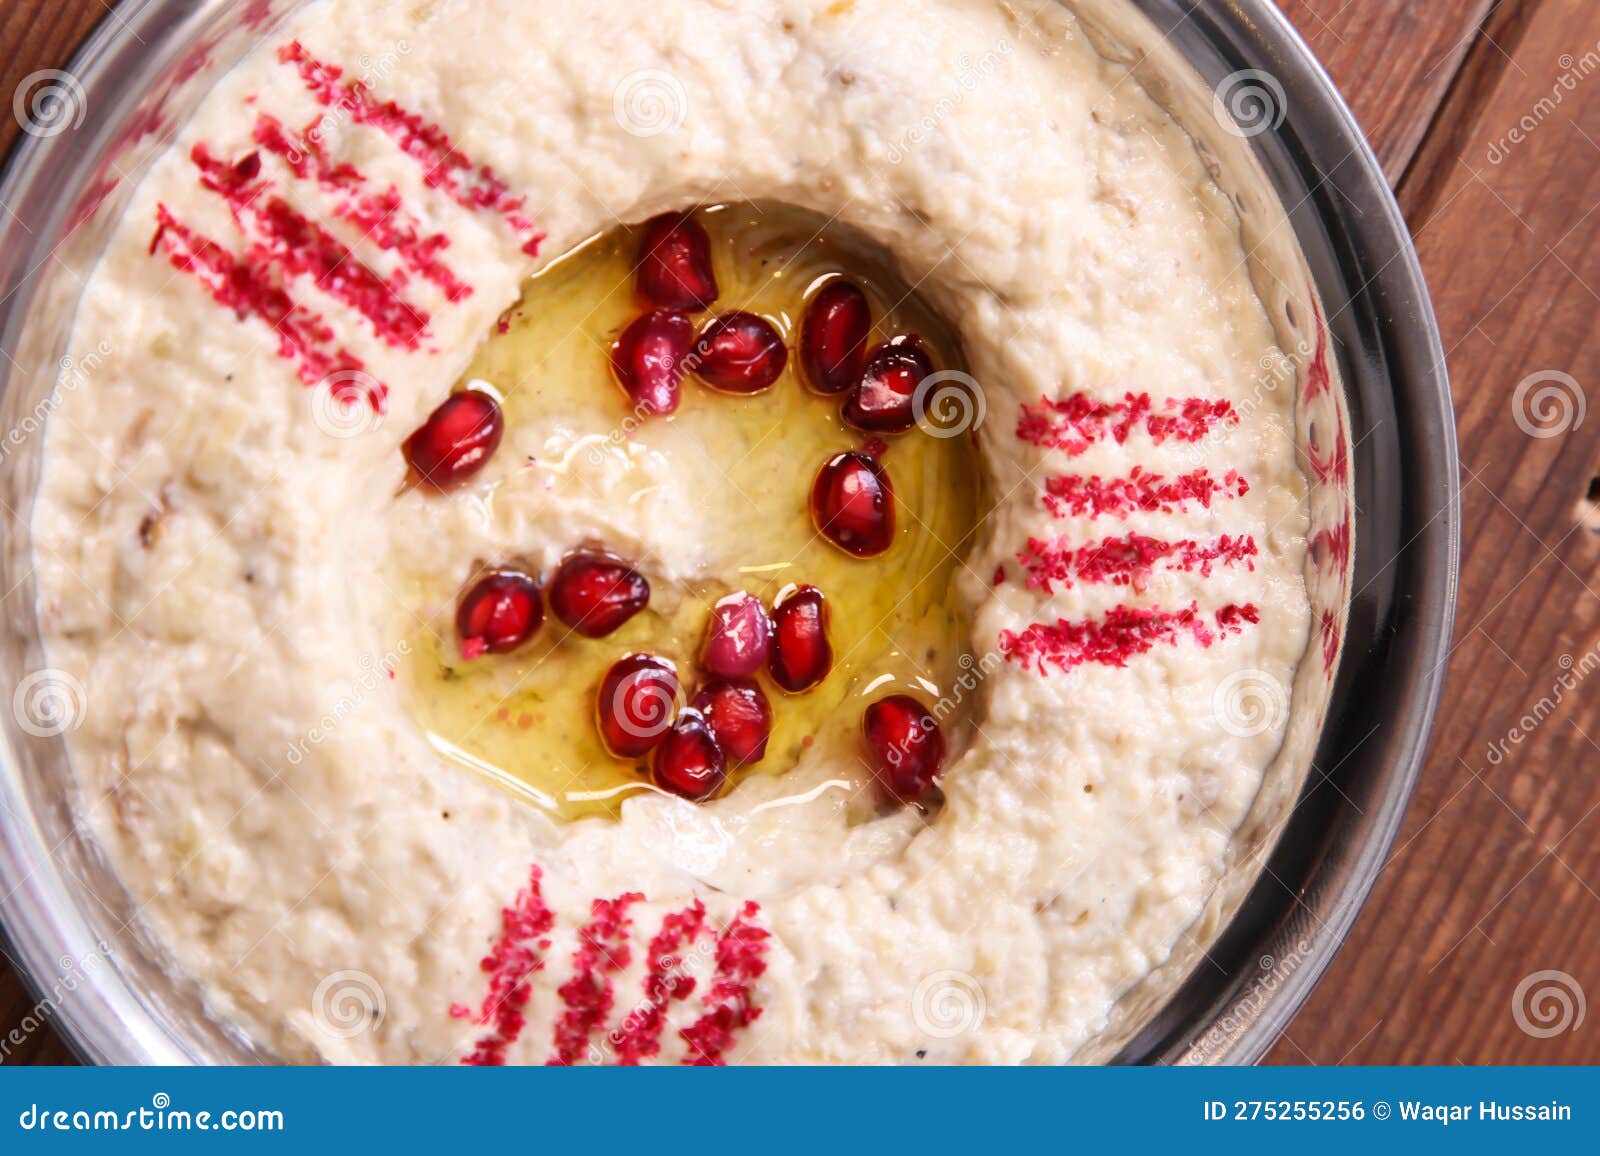 motabal or mutabal and baba ghanoush with pomegranate seeds served in dish  on background top of arabic food cold mezza